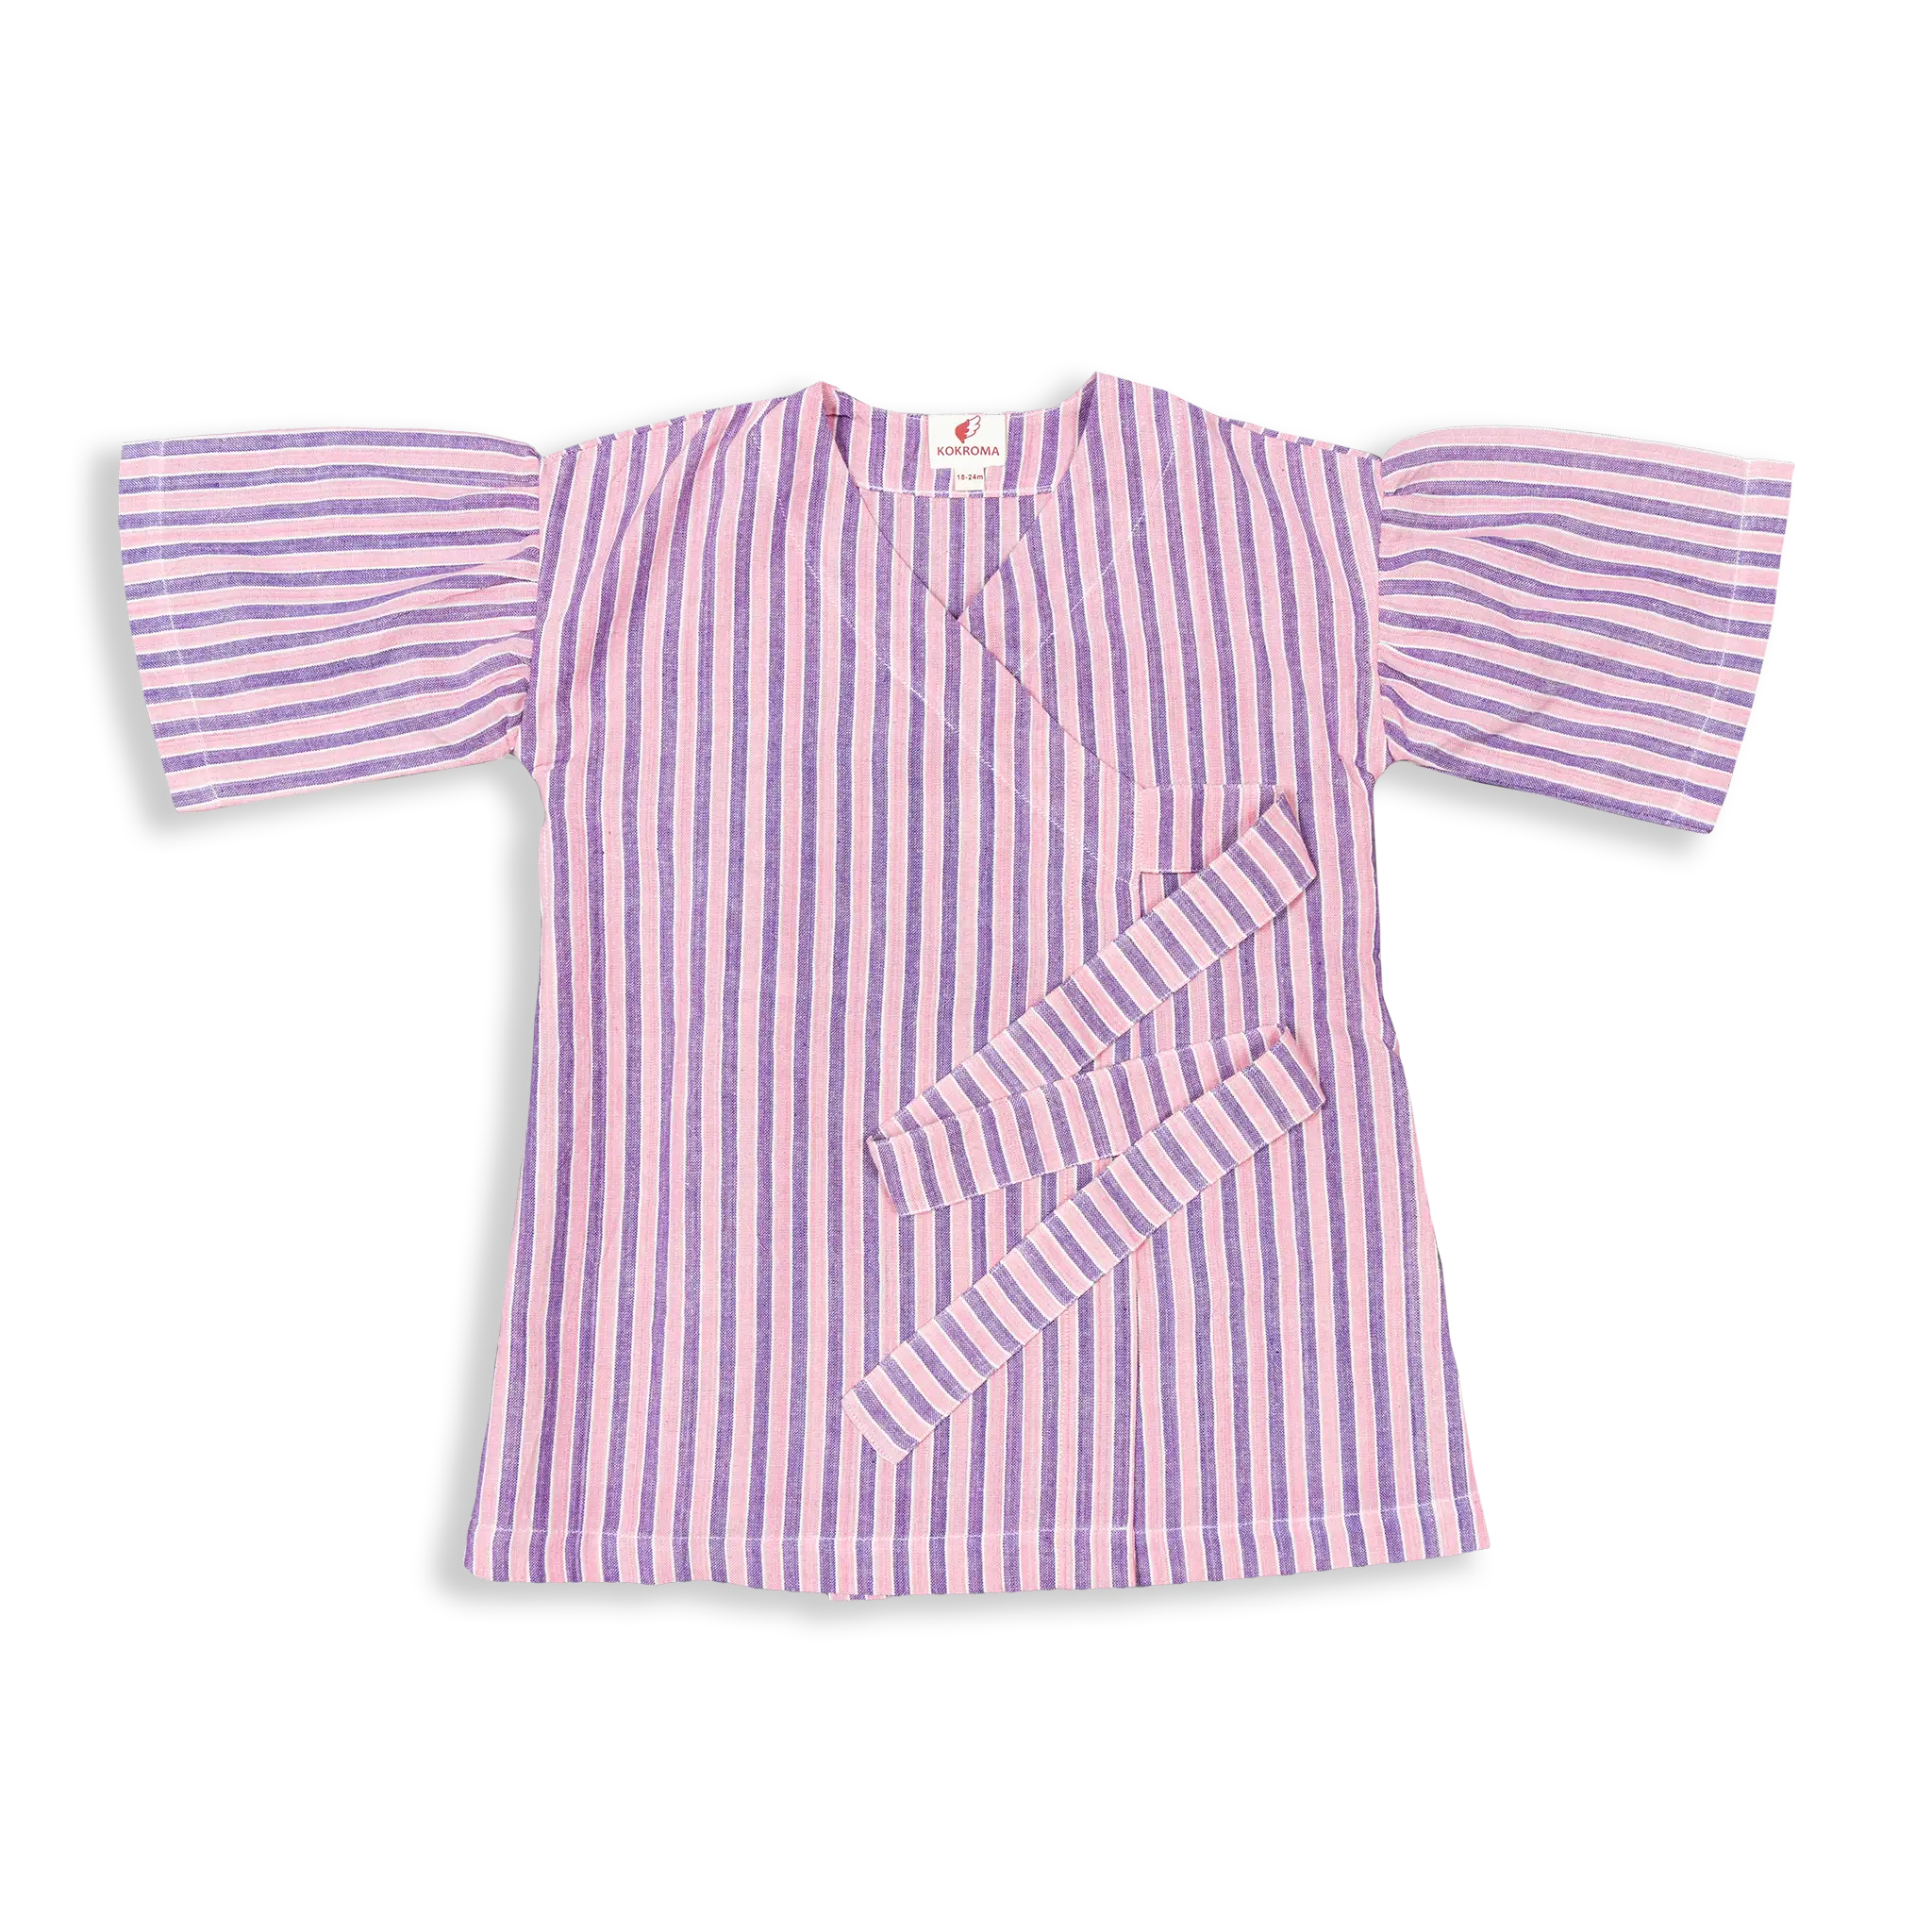 Our Kimono Wrap Dress is the perfect combination of comfort, style, and sustainability. Made from 100% soft and breathable cotton, this dress is perfect for any summer occasion for your daughter. The stripe-woven fabric adds a touch of sophistication and timeless style to your kid's wardrobe.